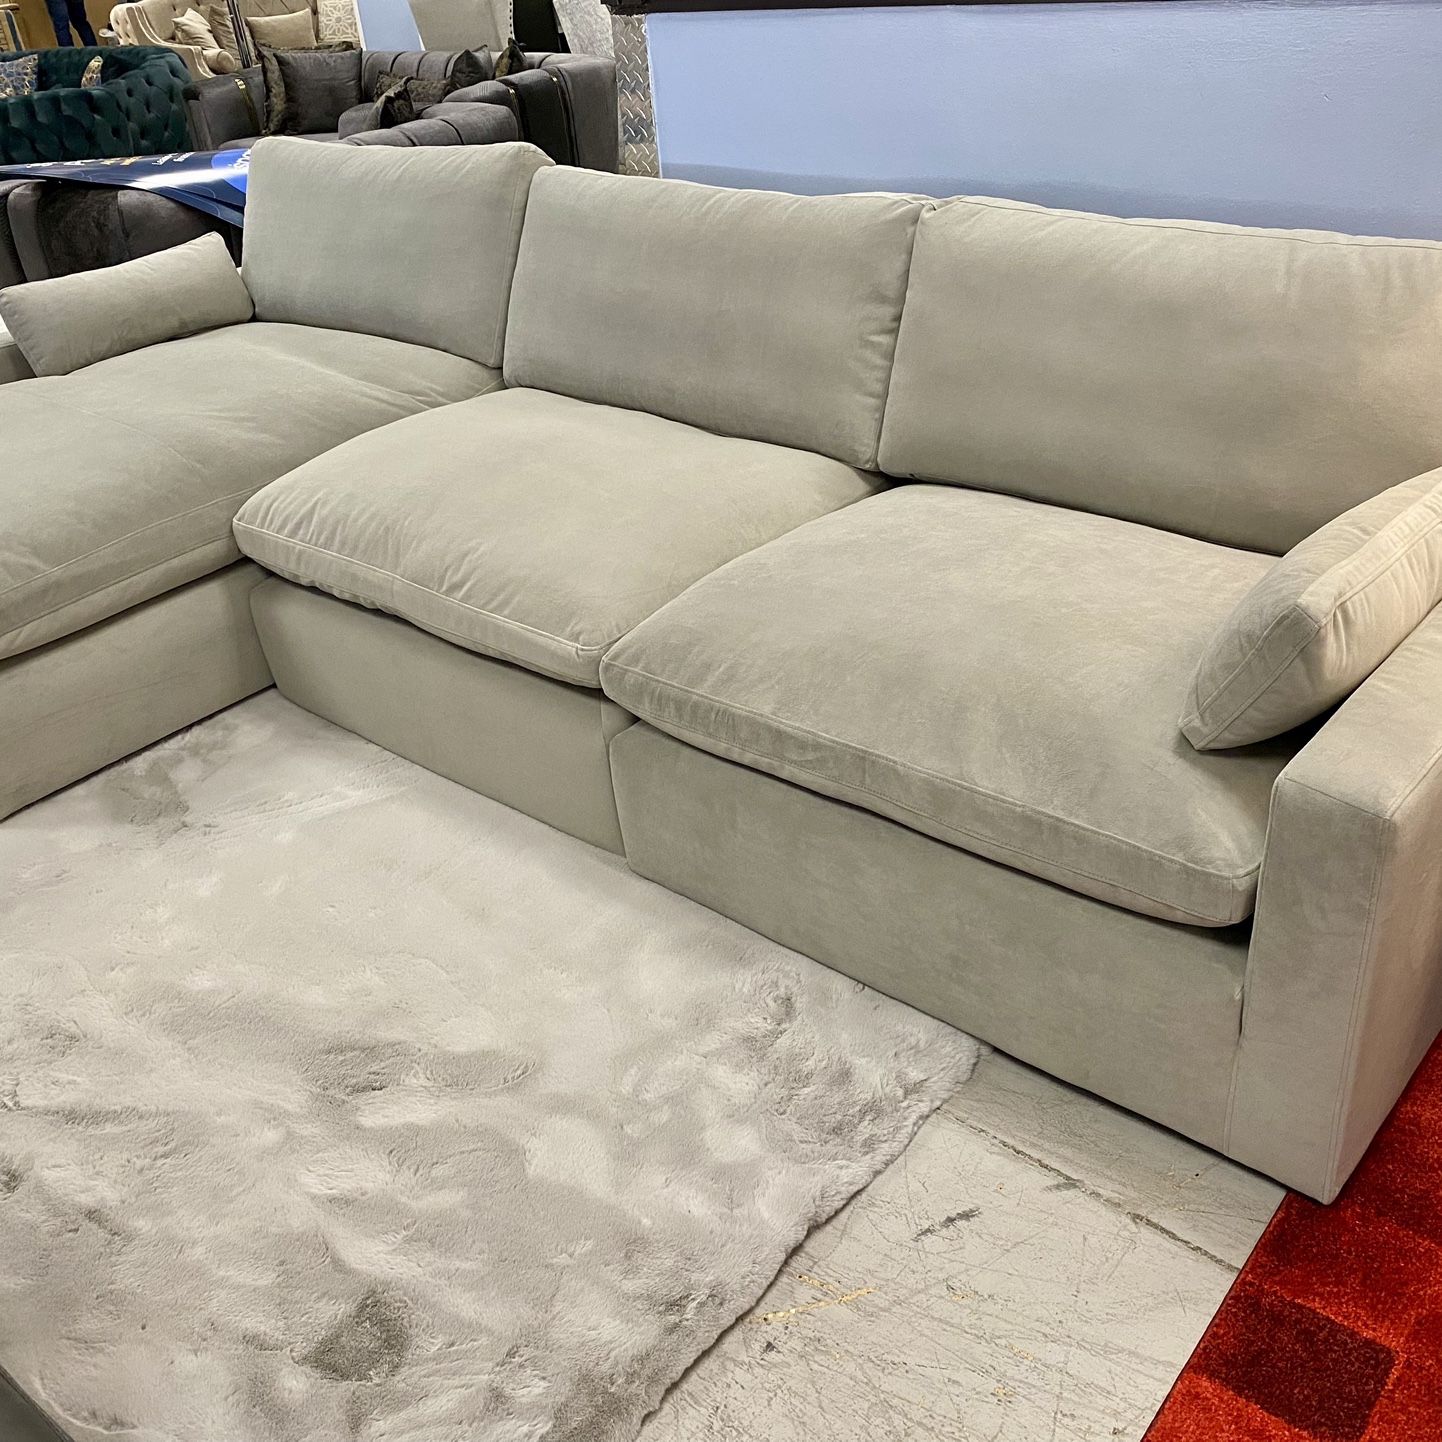 Modular Cloud Sectional, Soft Couch, Soft Sofa, Modern Couch